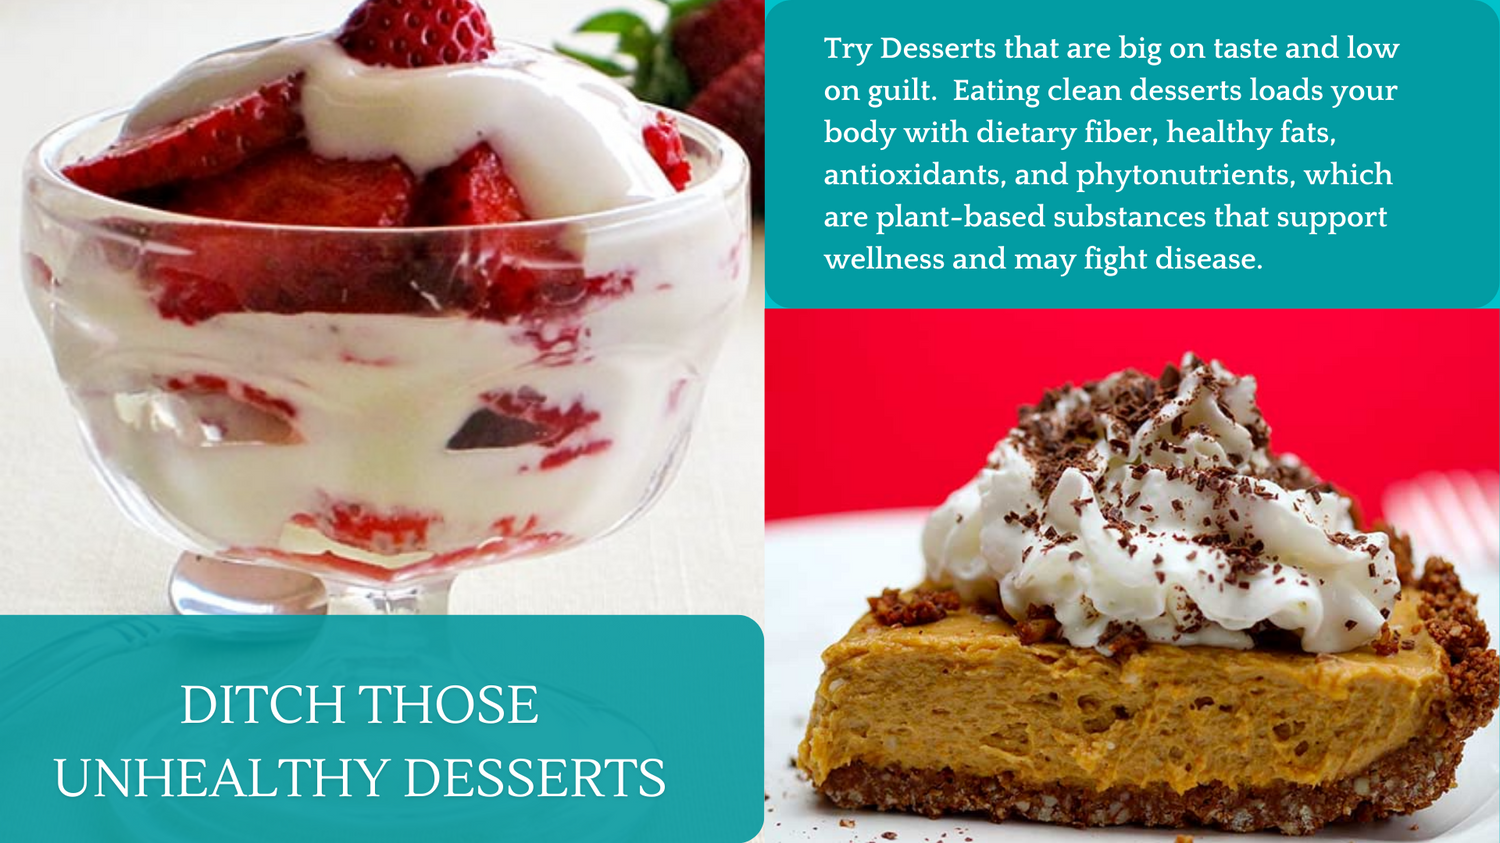 Ditch those unhealthy desserts 1